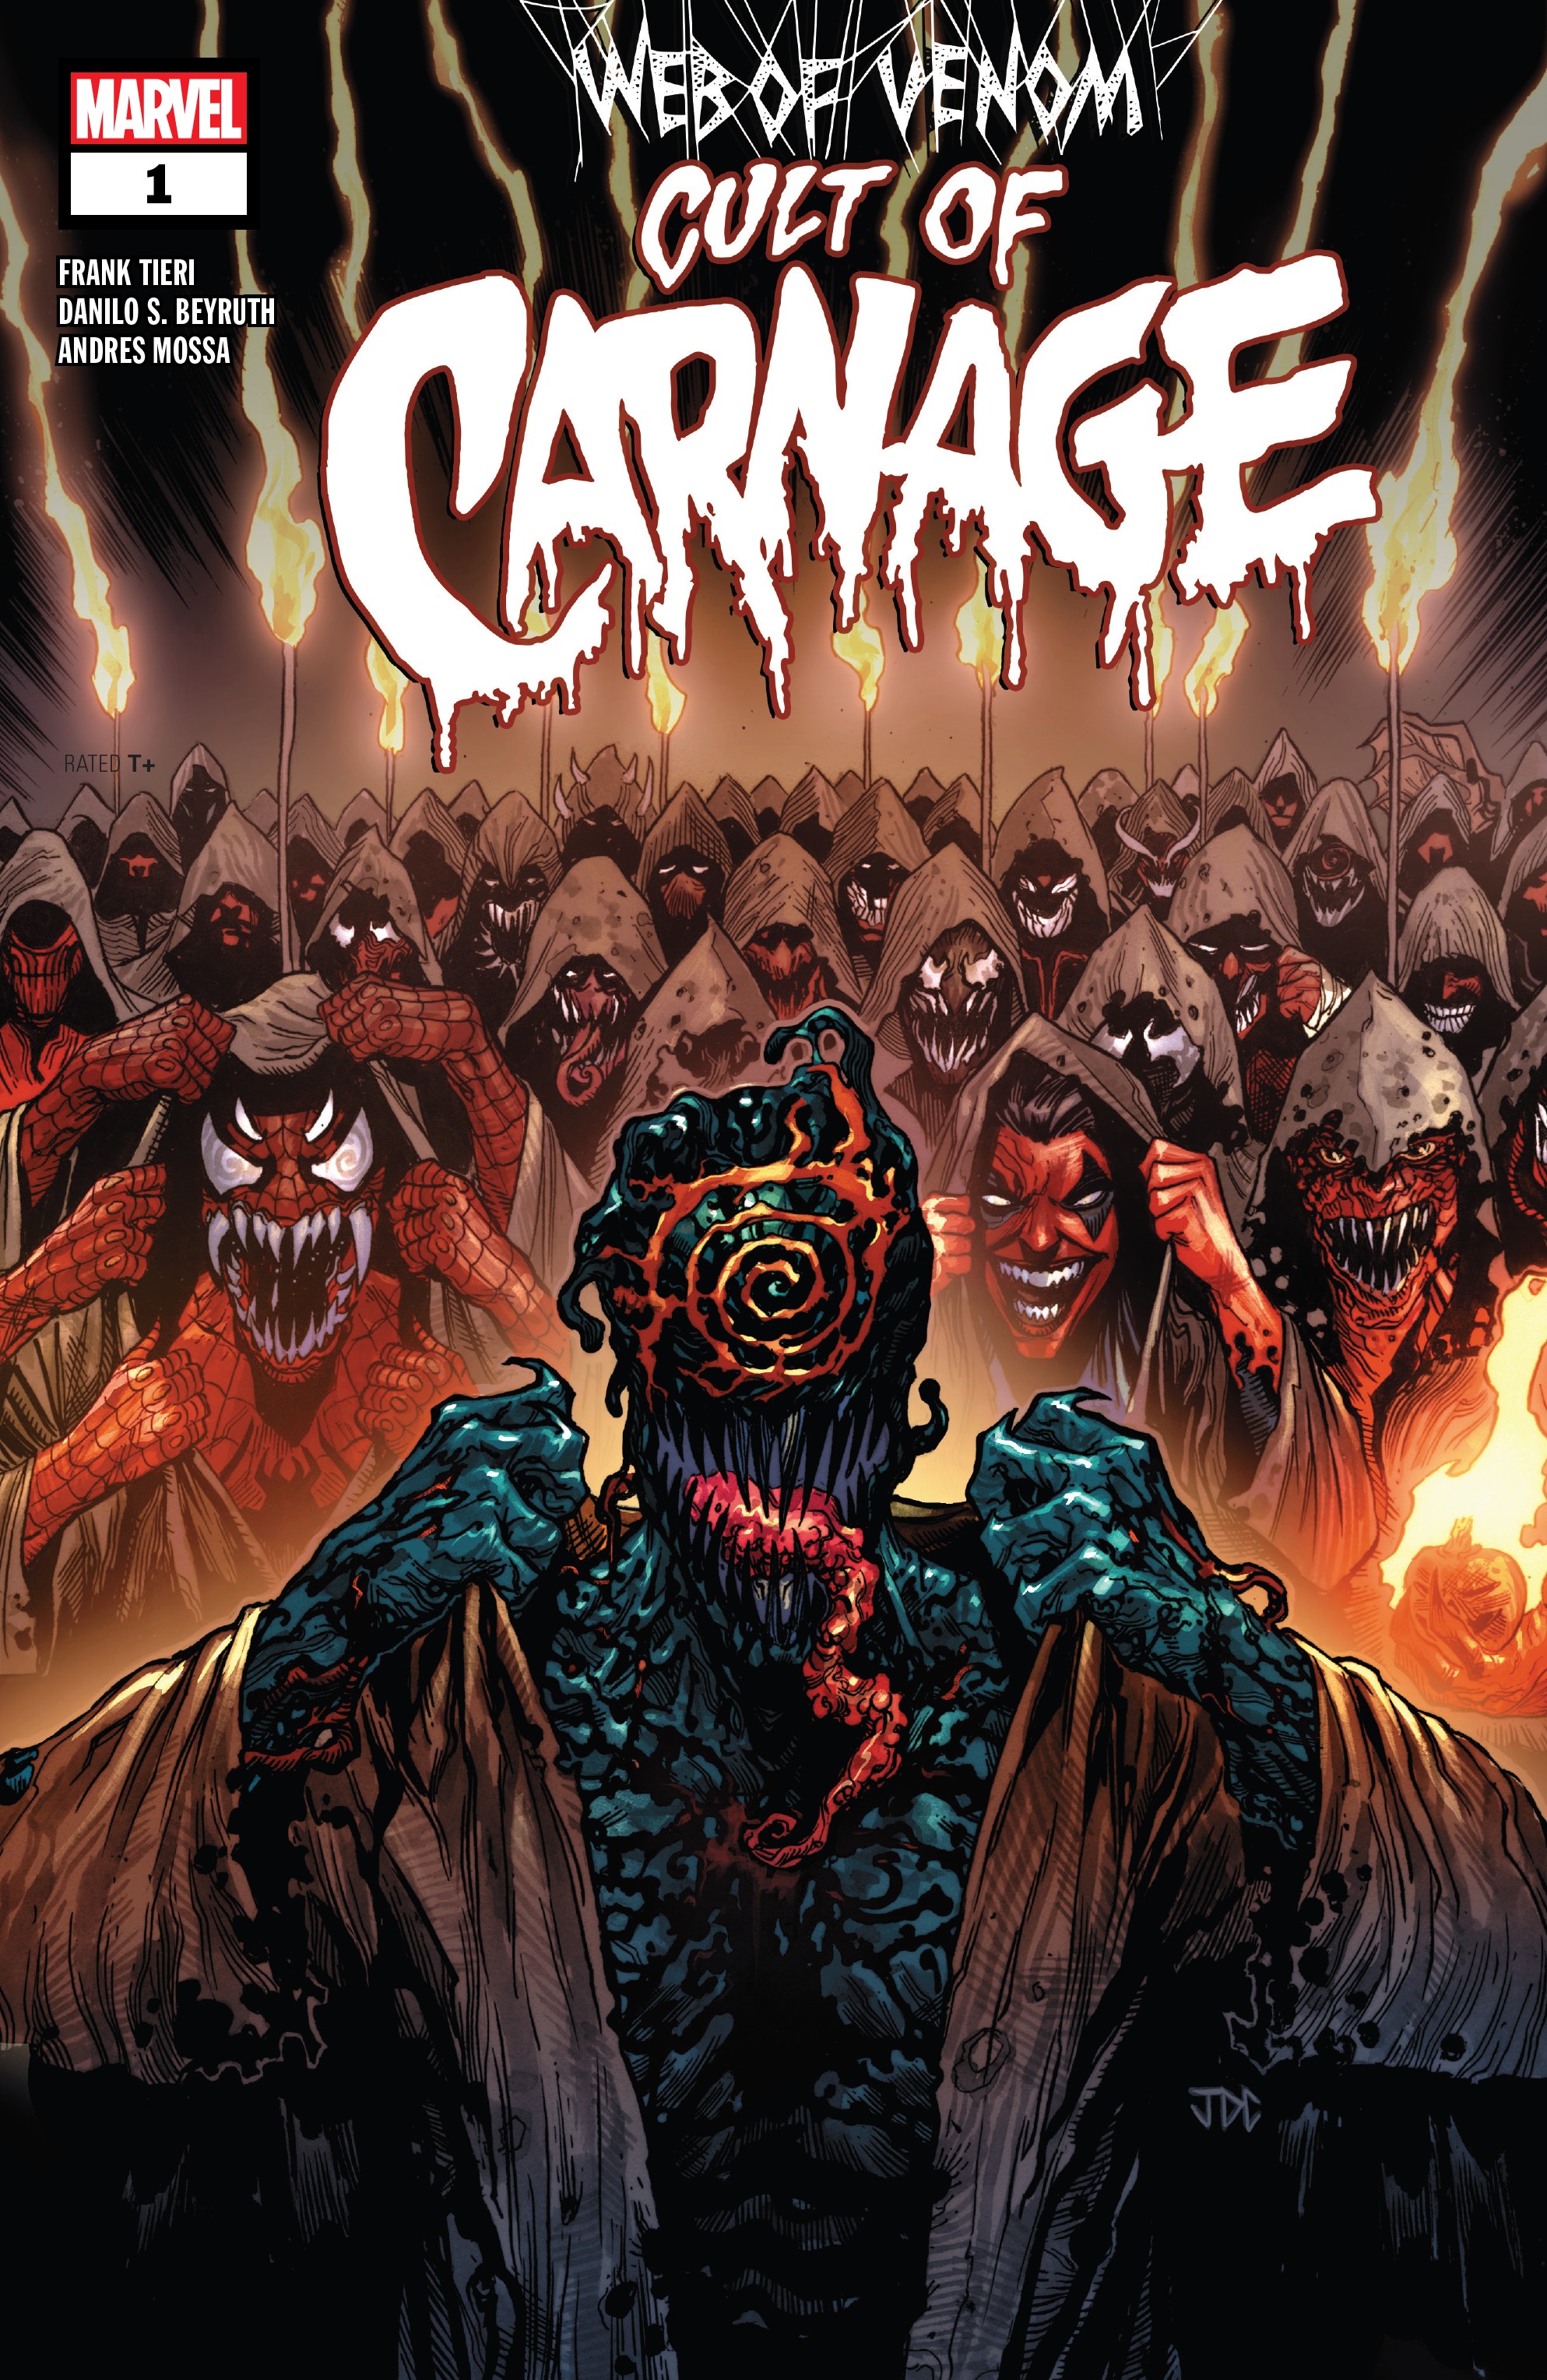 Read online Web of Venom: Cult of Carnage comic -  Issue # Full - 1